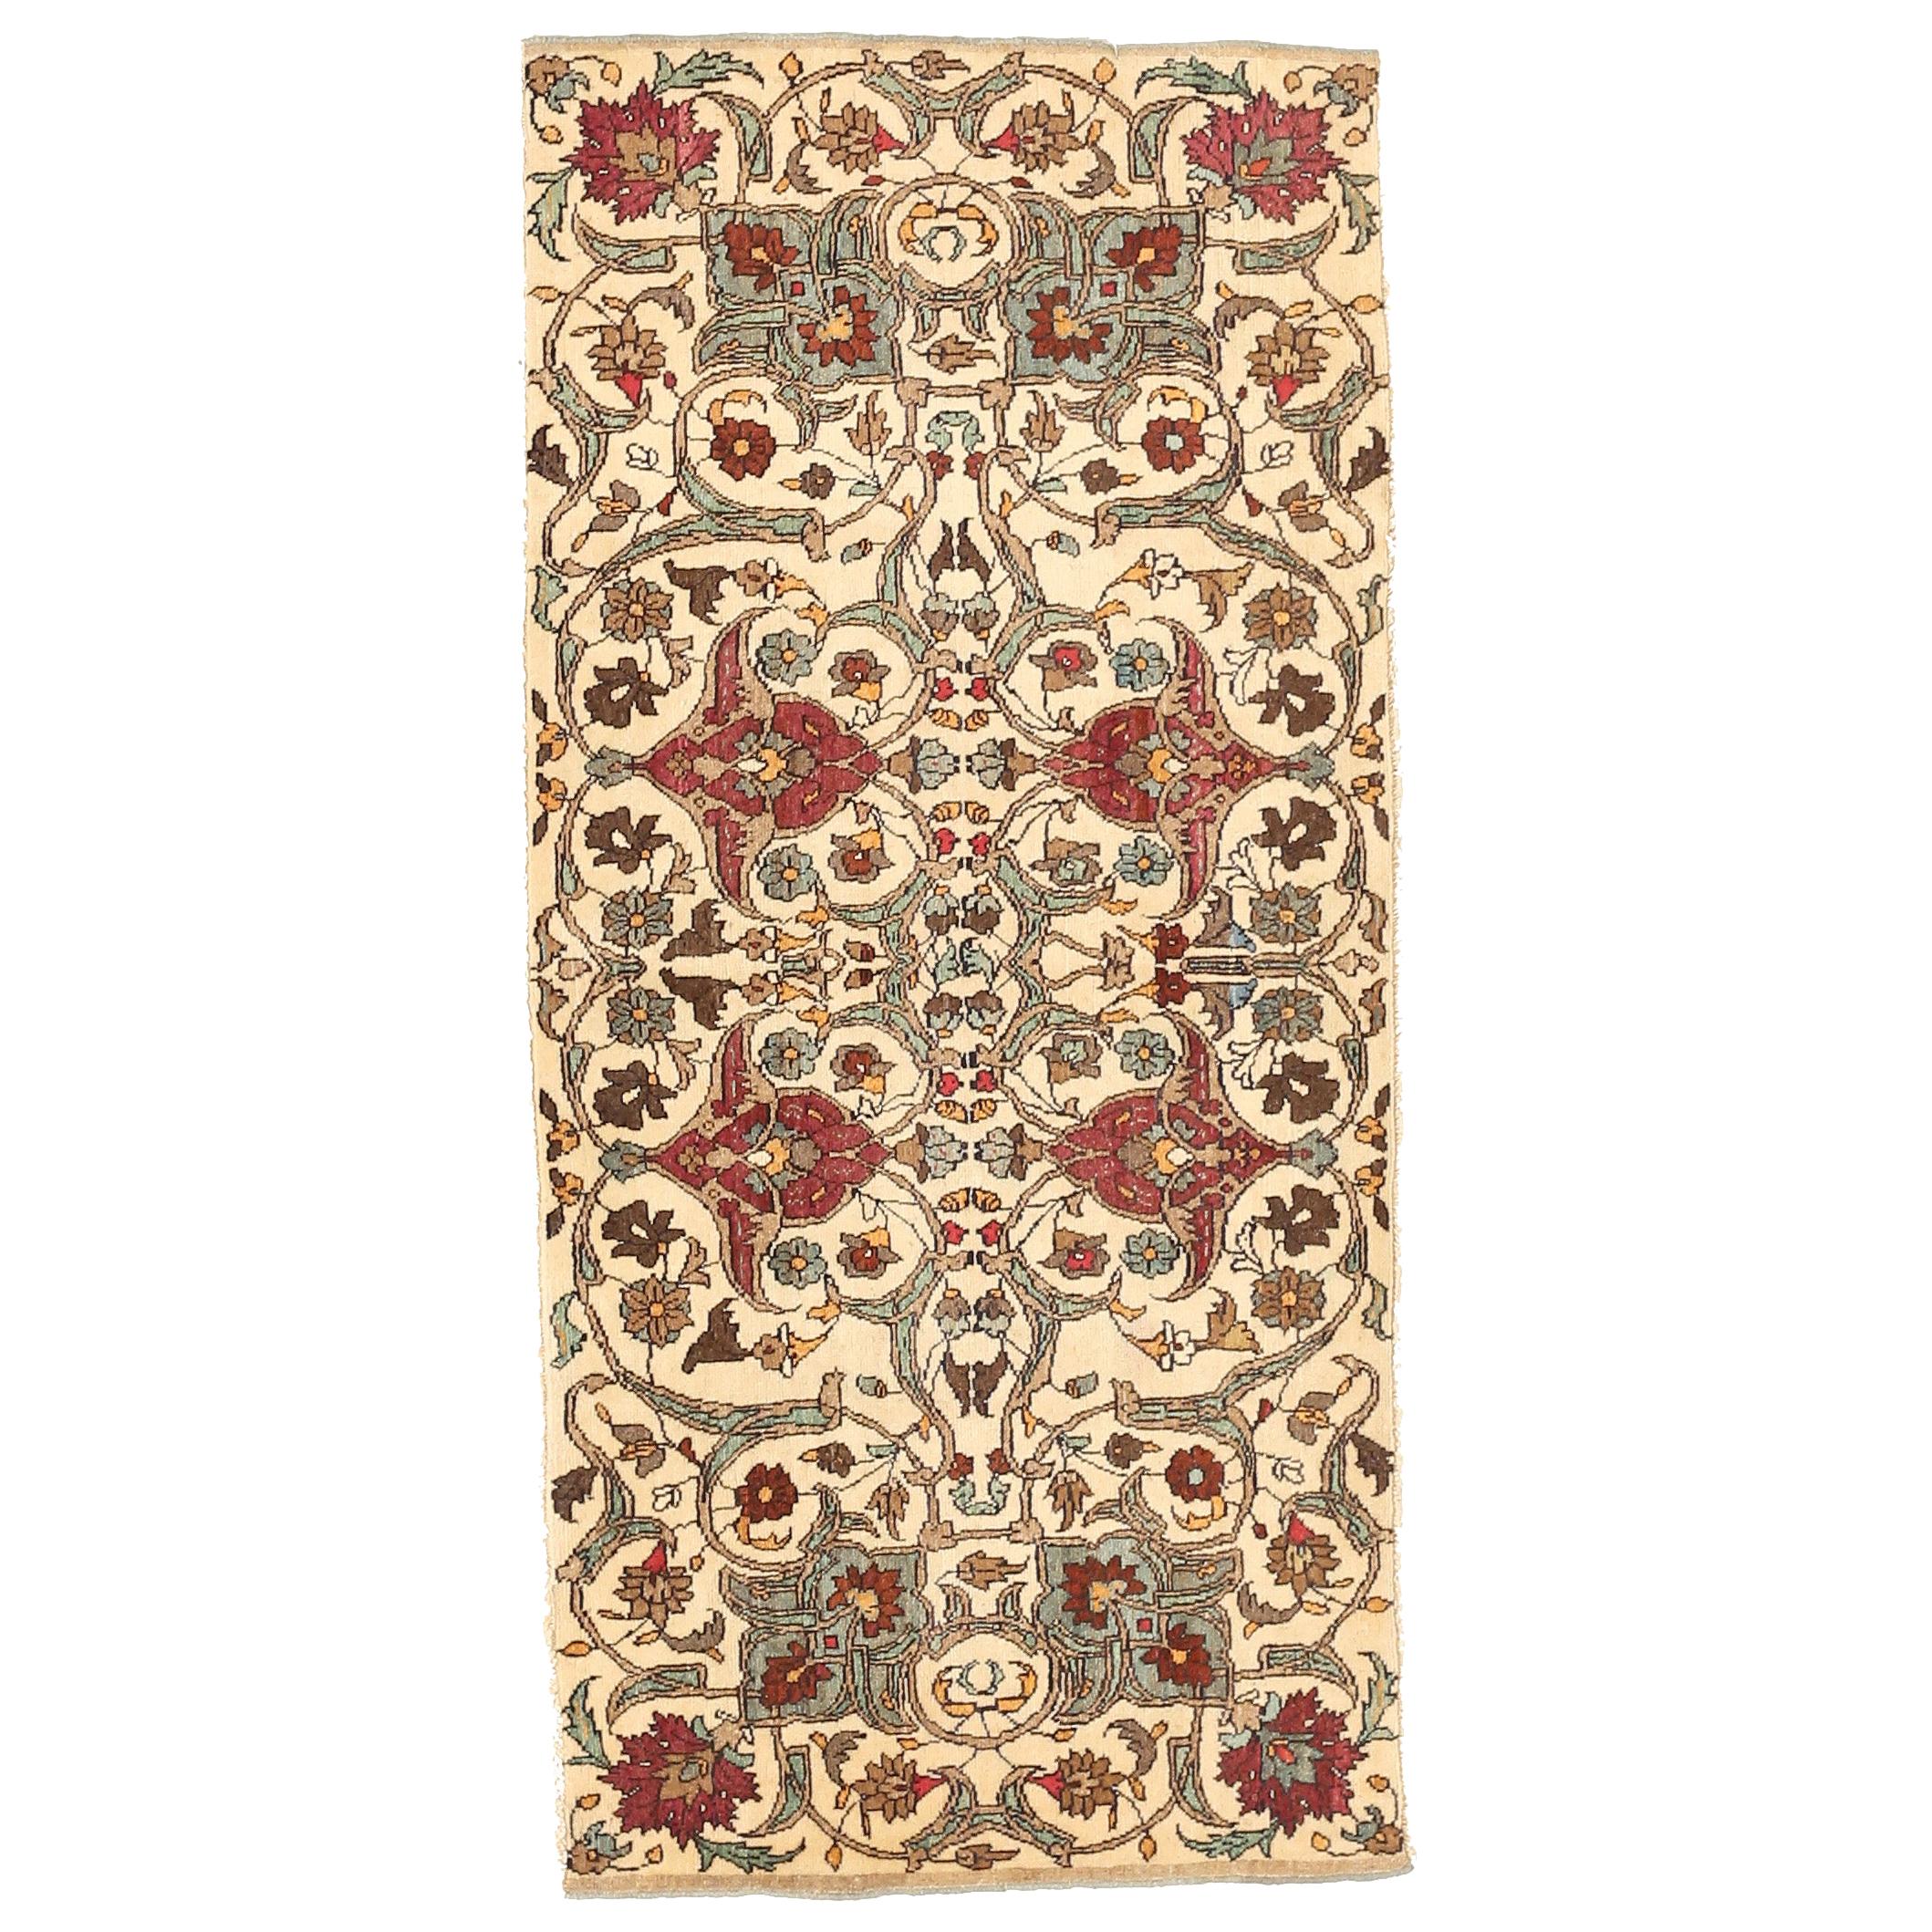 Rare Antique Persian Semnan Rug with Red and Brown Floral Details on Ivory Field For Sale